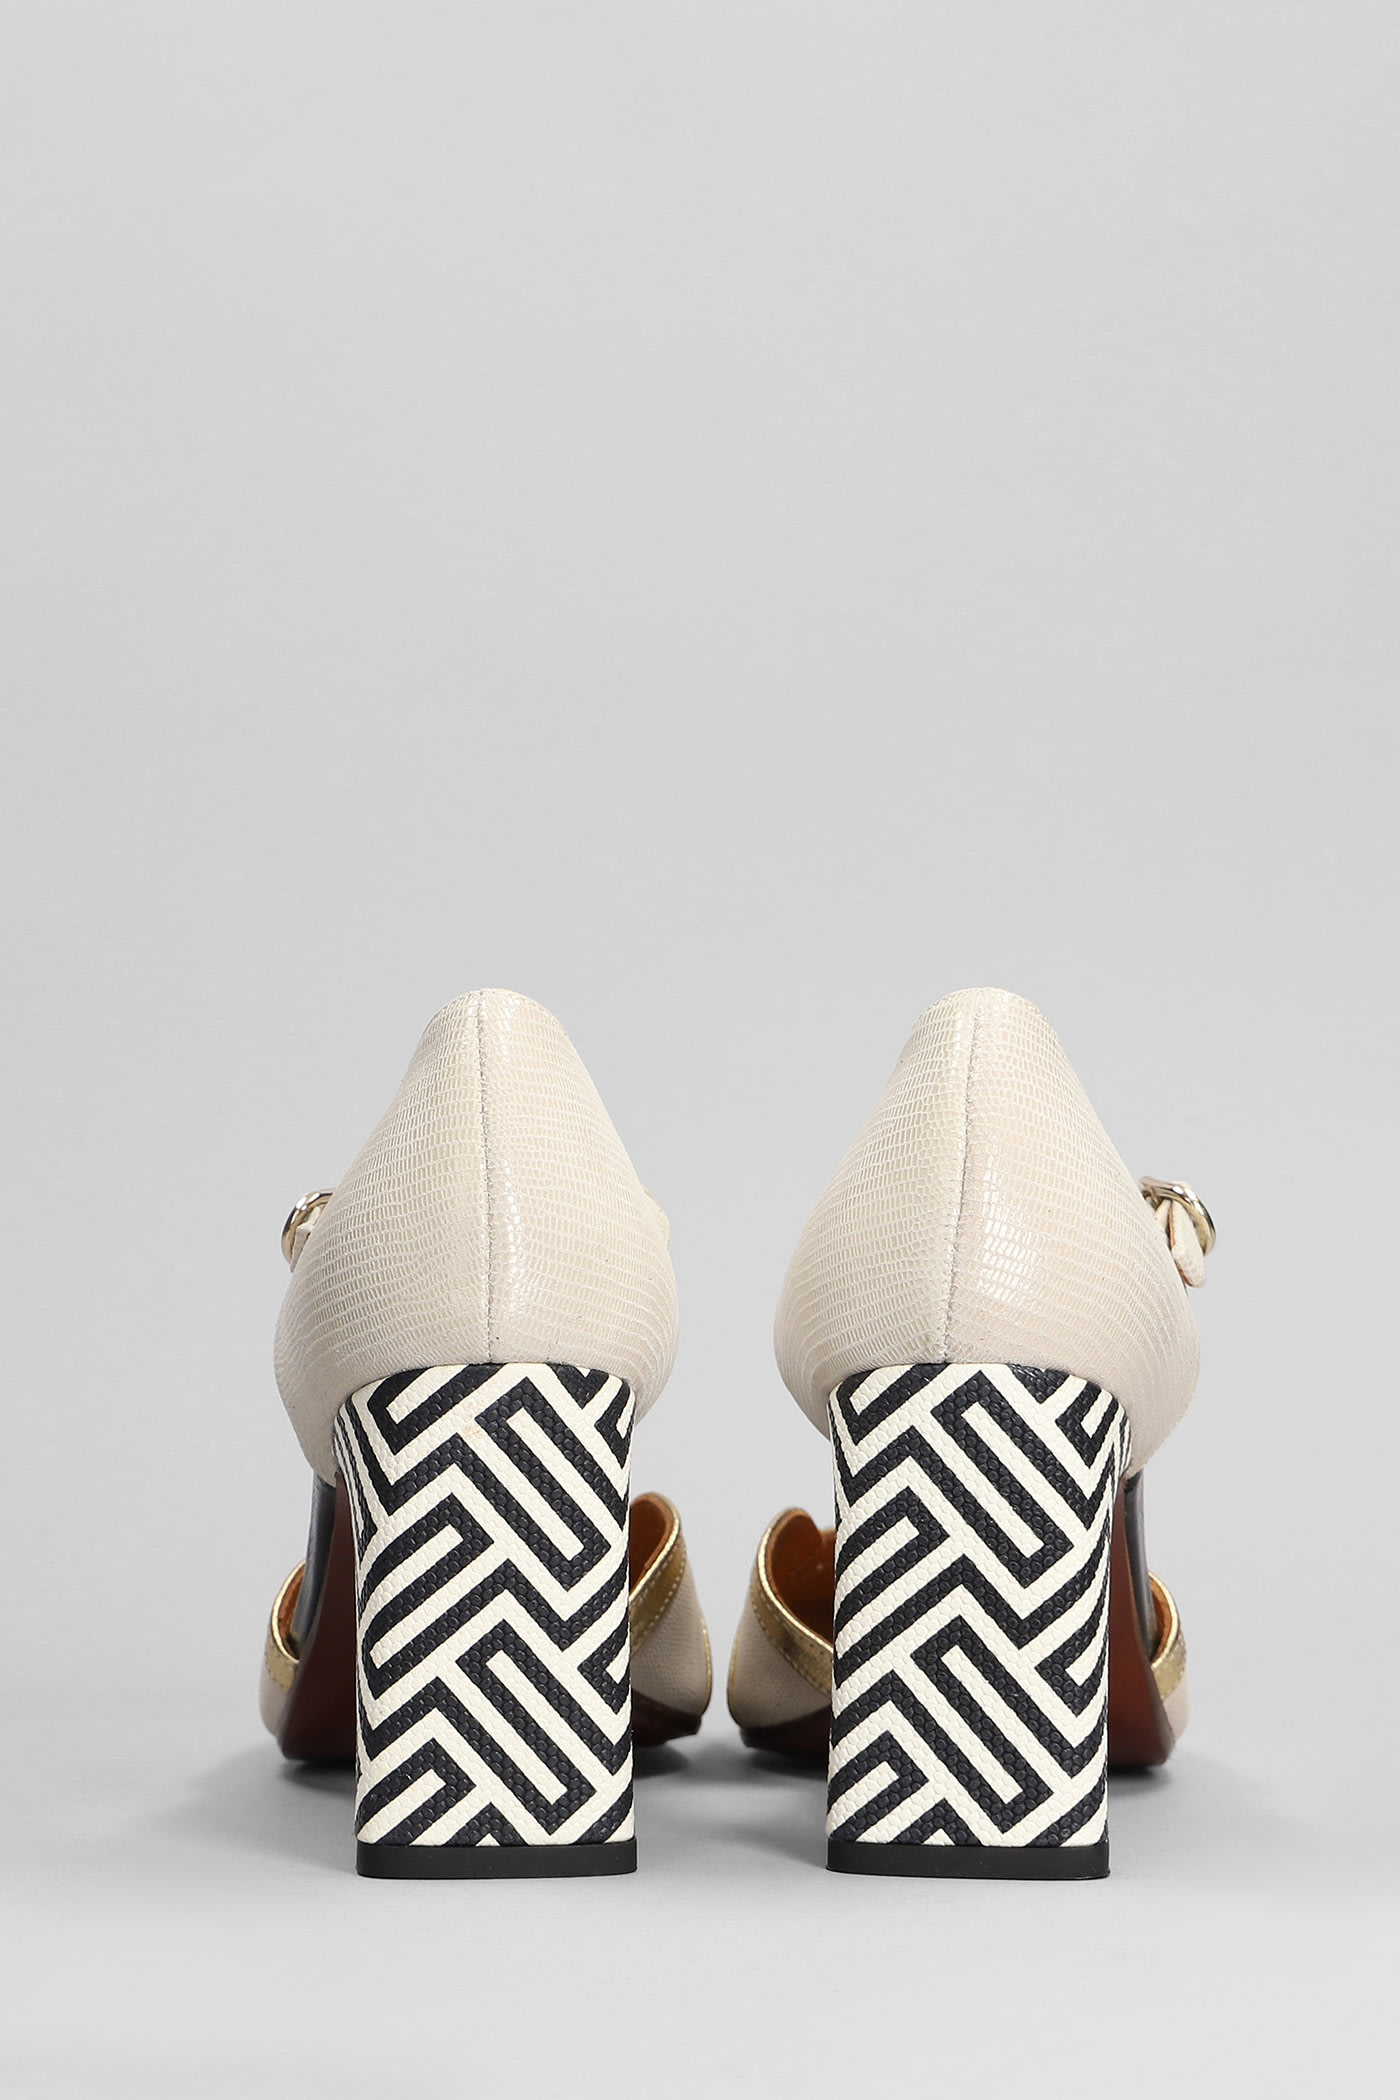 Shop Chie Mihara Olali Pumps In Beige Leather